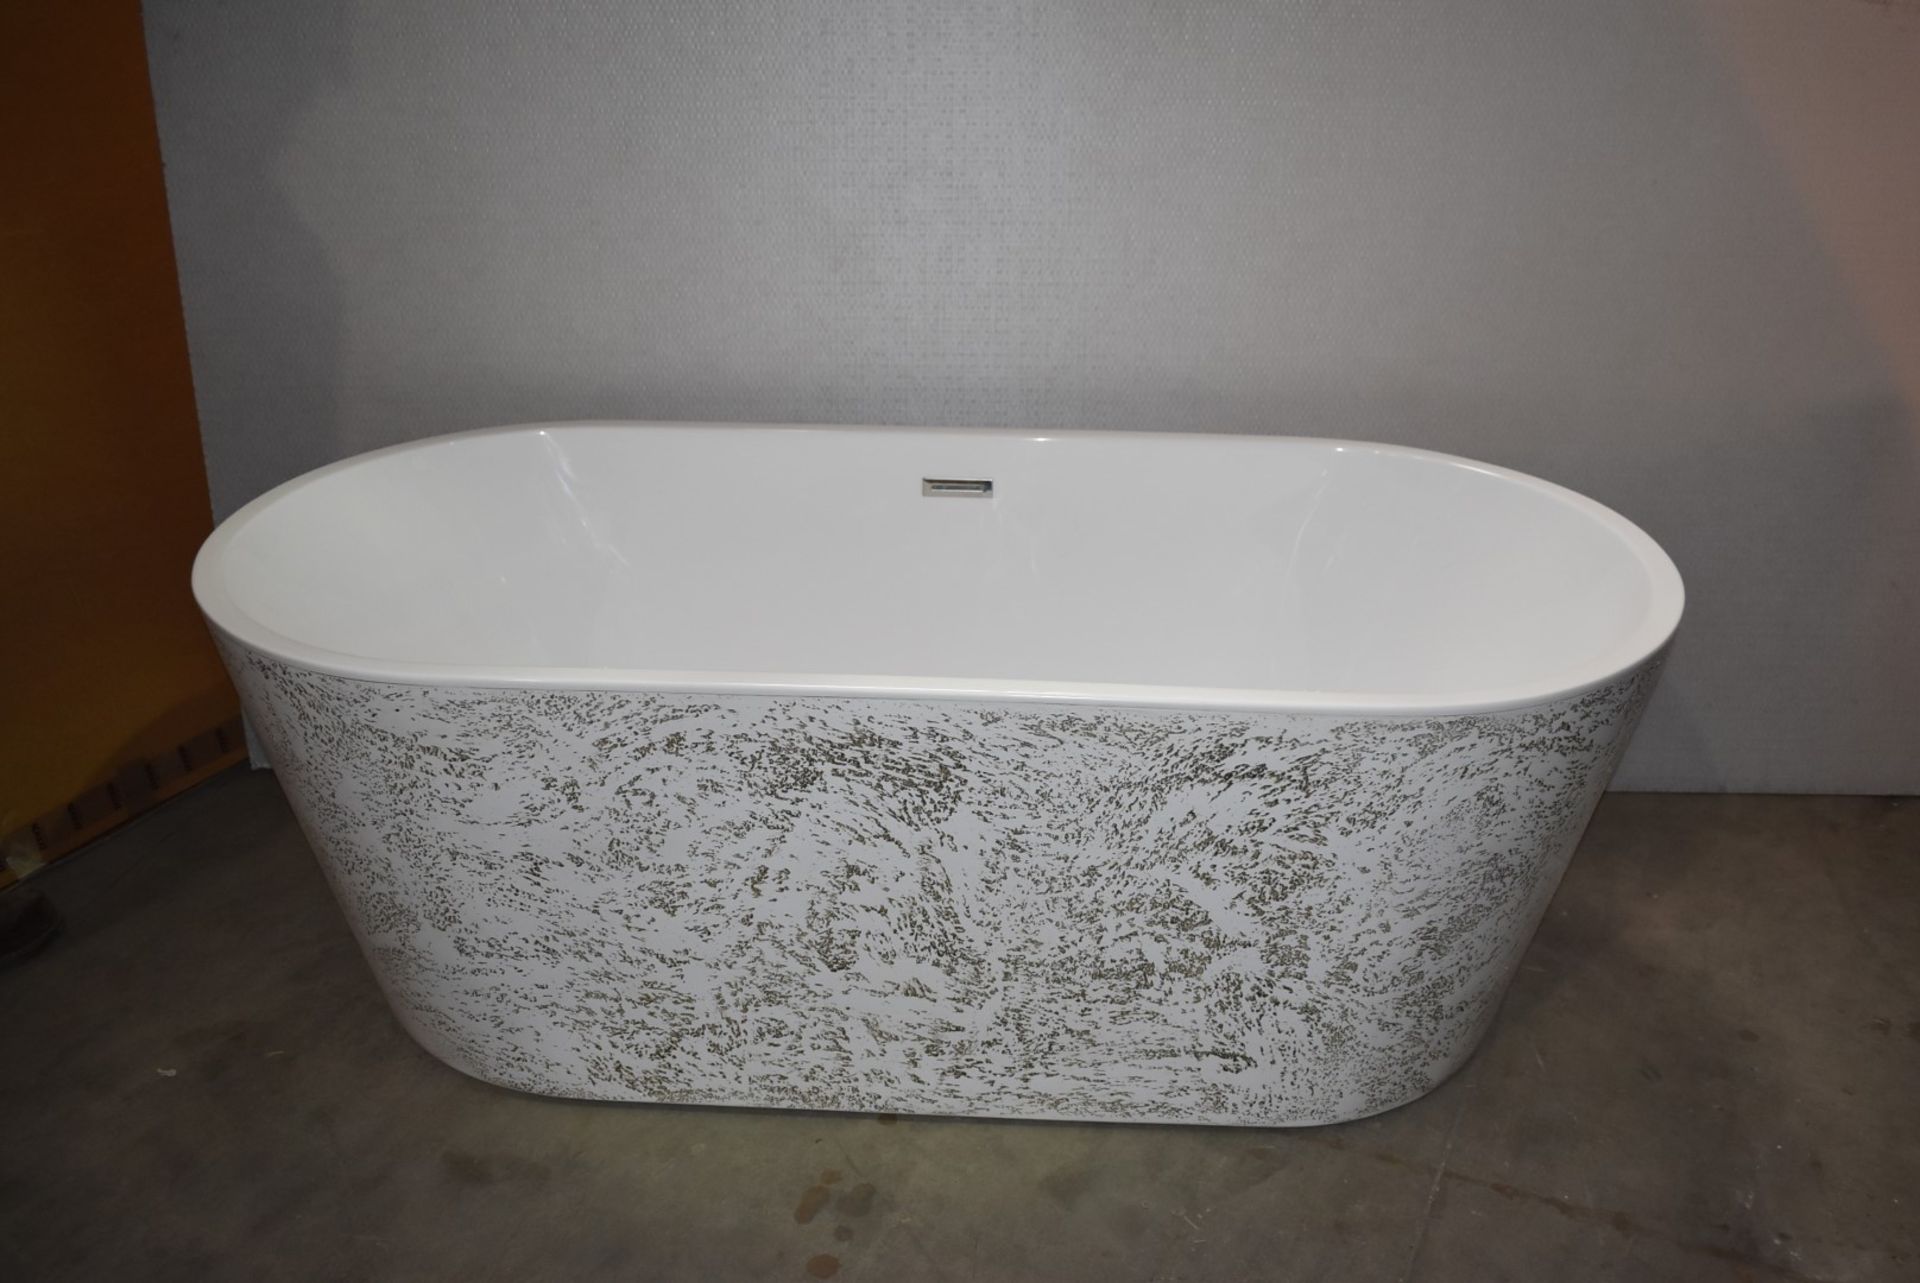 1 x Contemporary Freestanding Bath With a Tactile Textured Surround Panel - 1690mm Wide - New - Image 11 of 15